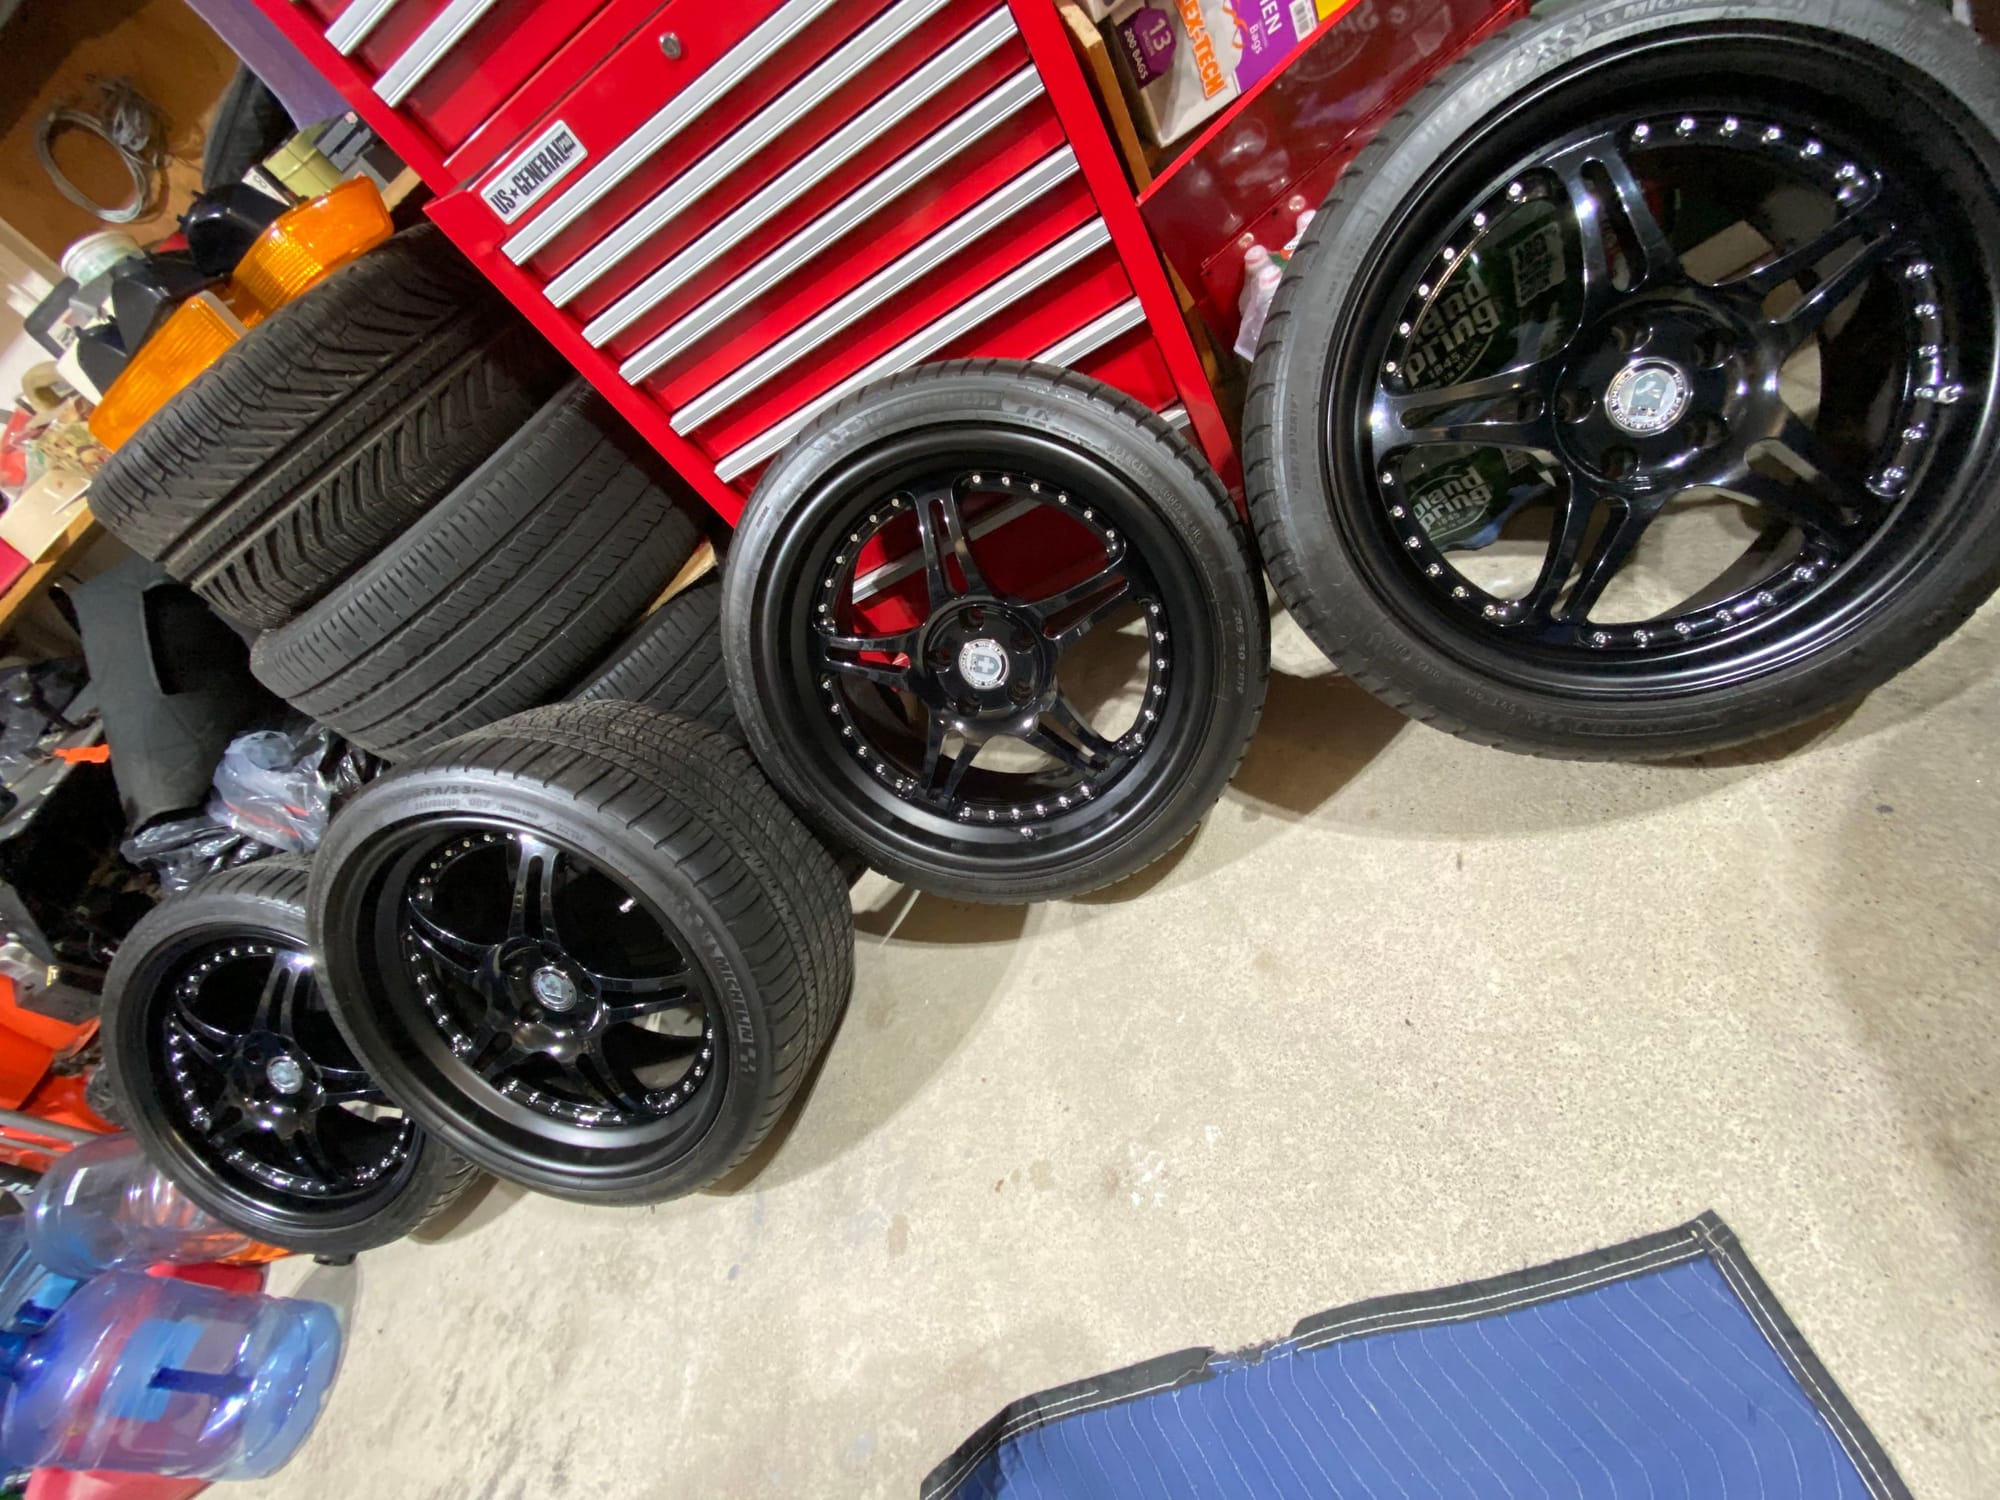 Wheels and Tires/Axles - HRE 547 - 19" Forged 3 Piece Wheels WITH Michelin Tires - Used - Wayne, NJ 07470, United States